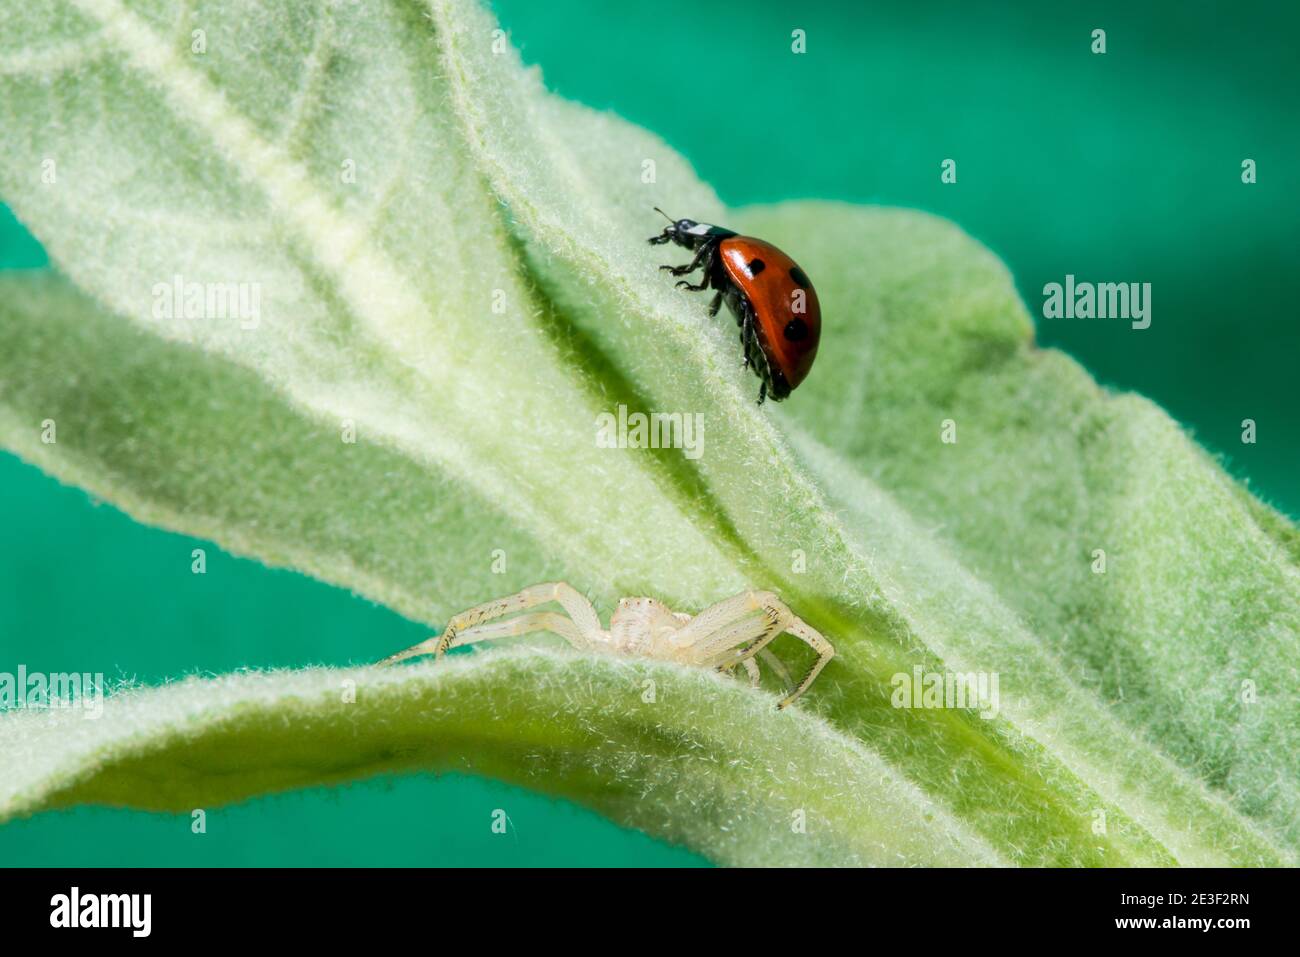 Kansas City, Kansas. Crab spider hiding in milkweed plant with Seven-spotted ladybird beetle. Stock Photo